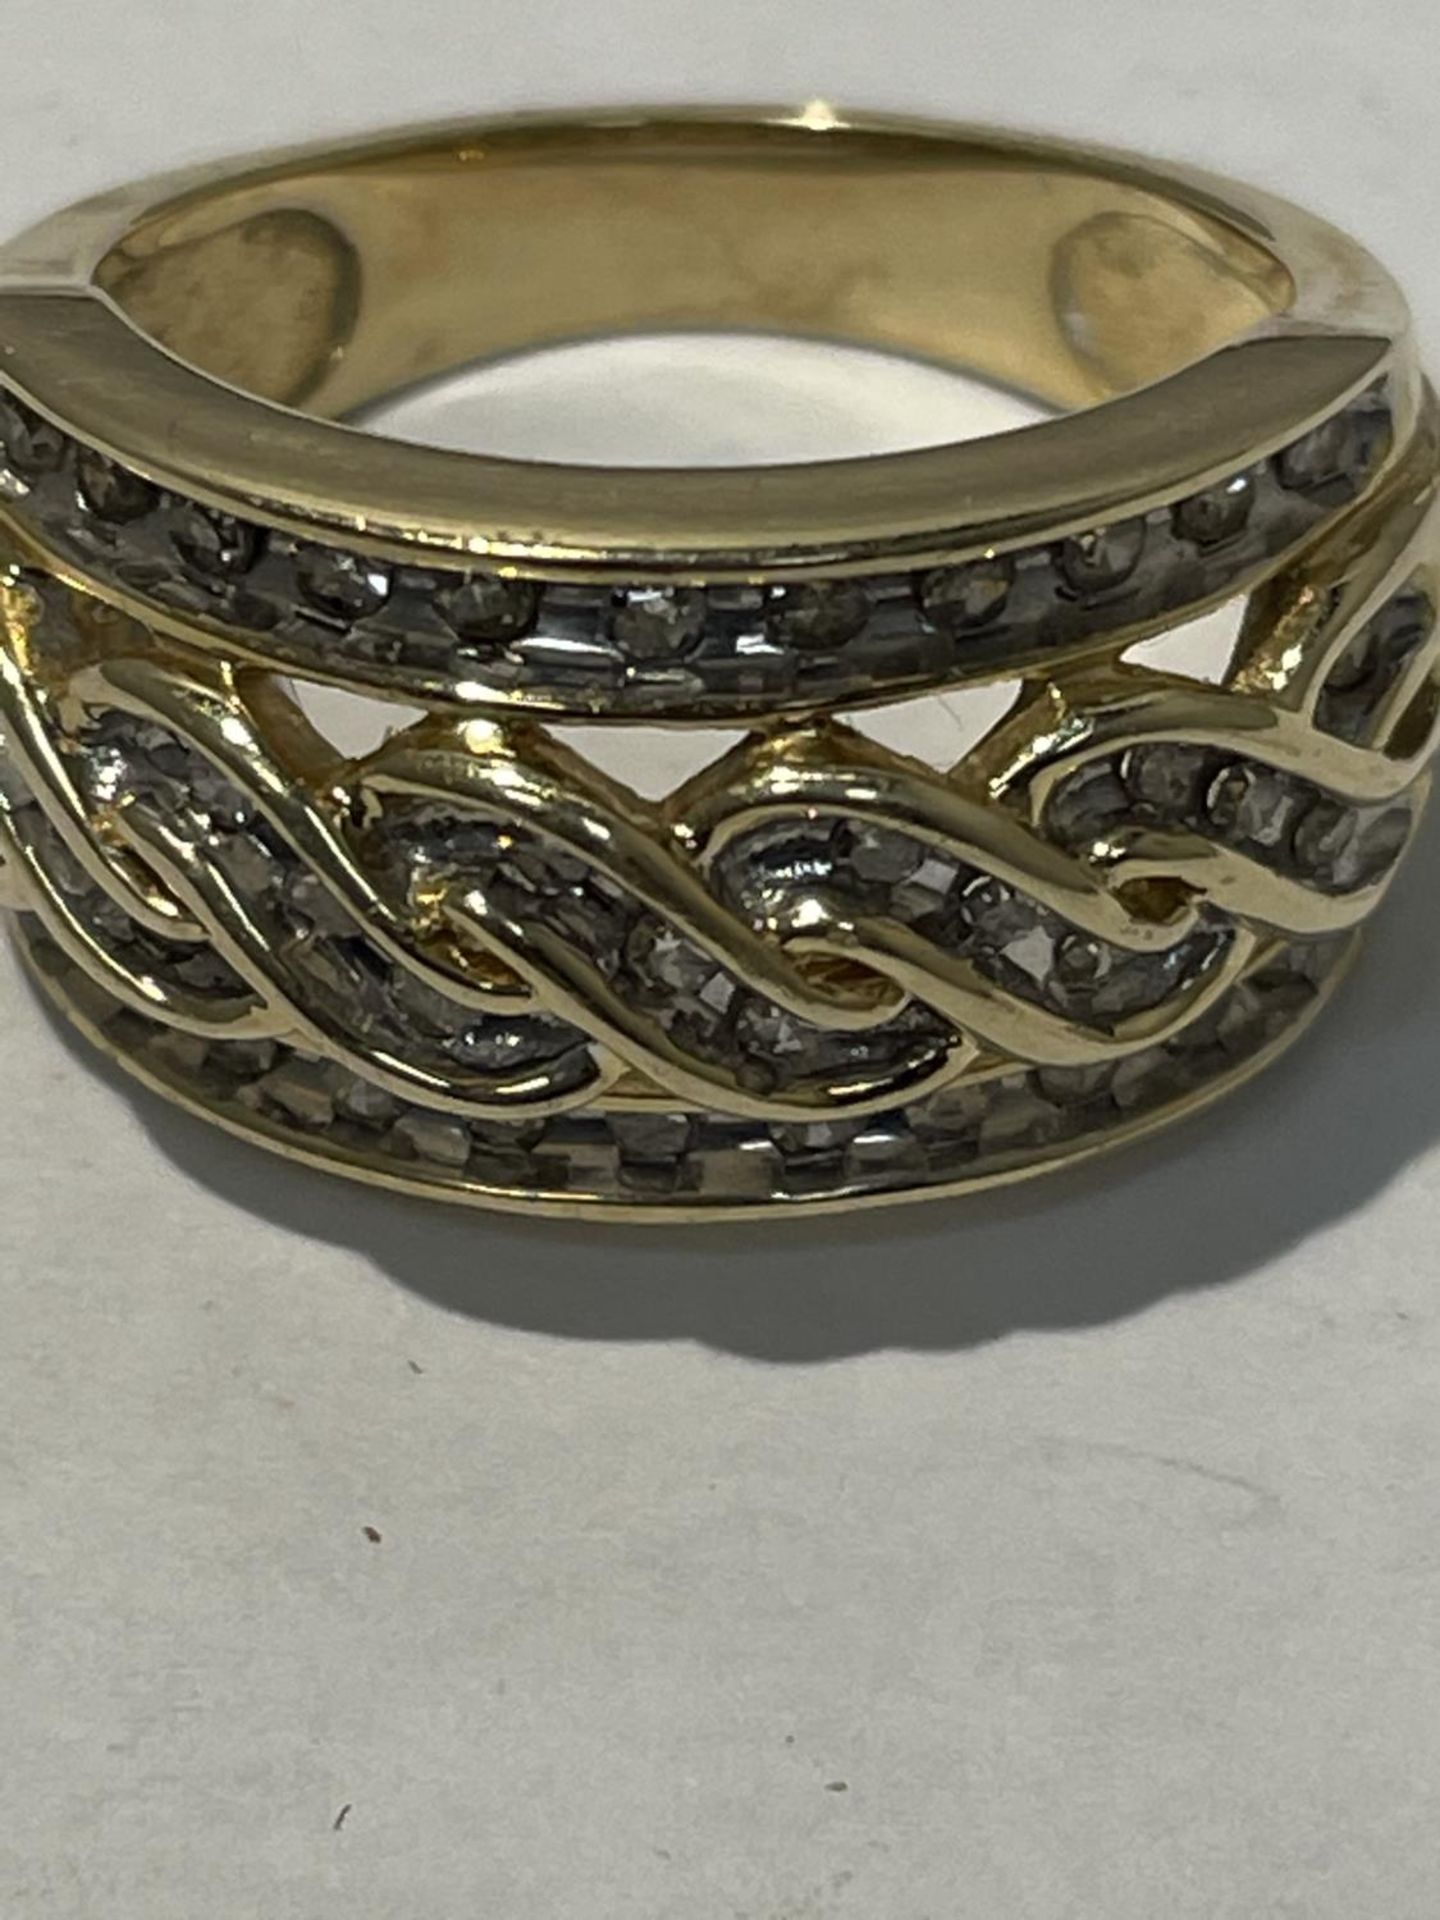 A 9 CARAT YELLOW GOLD RING WITH 1 CARAT OF DIAMONDS WITH A TWIST DESIGN SIZE N/O - Image 4 of 4